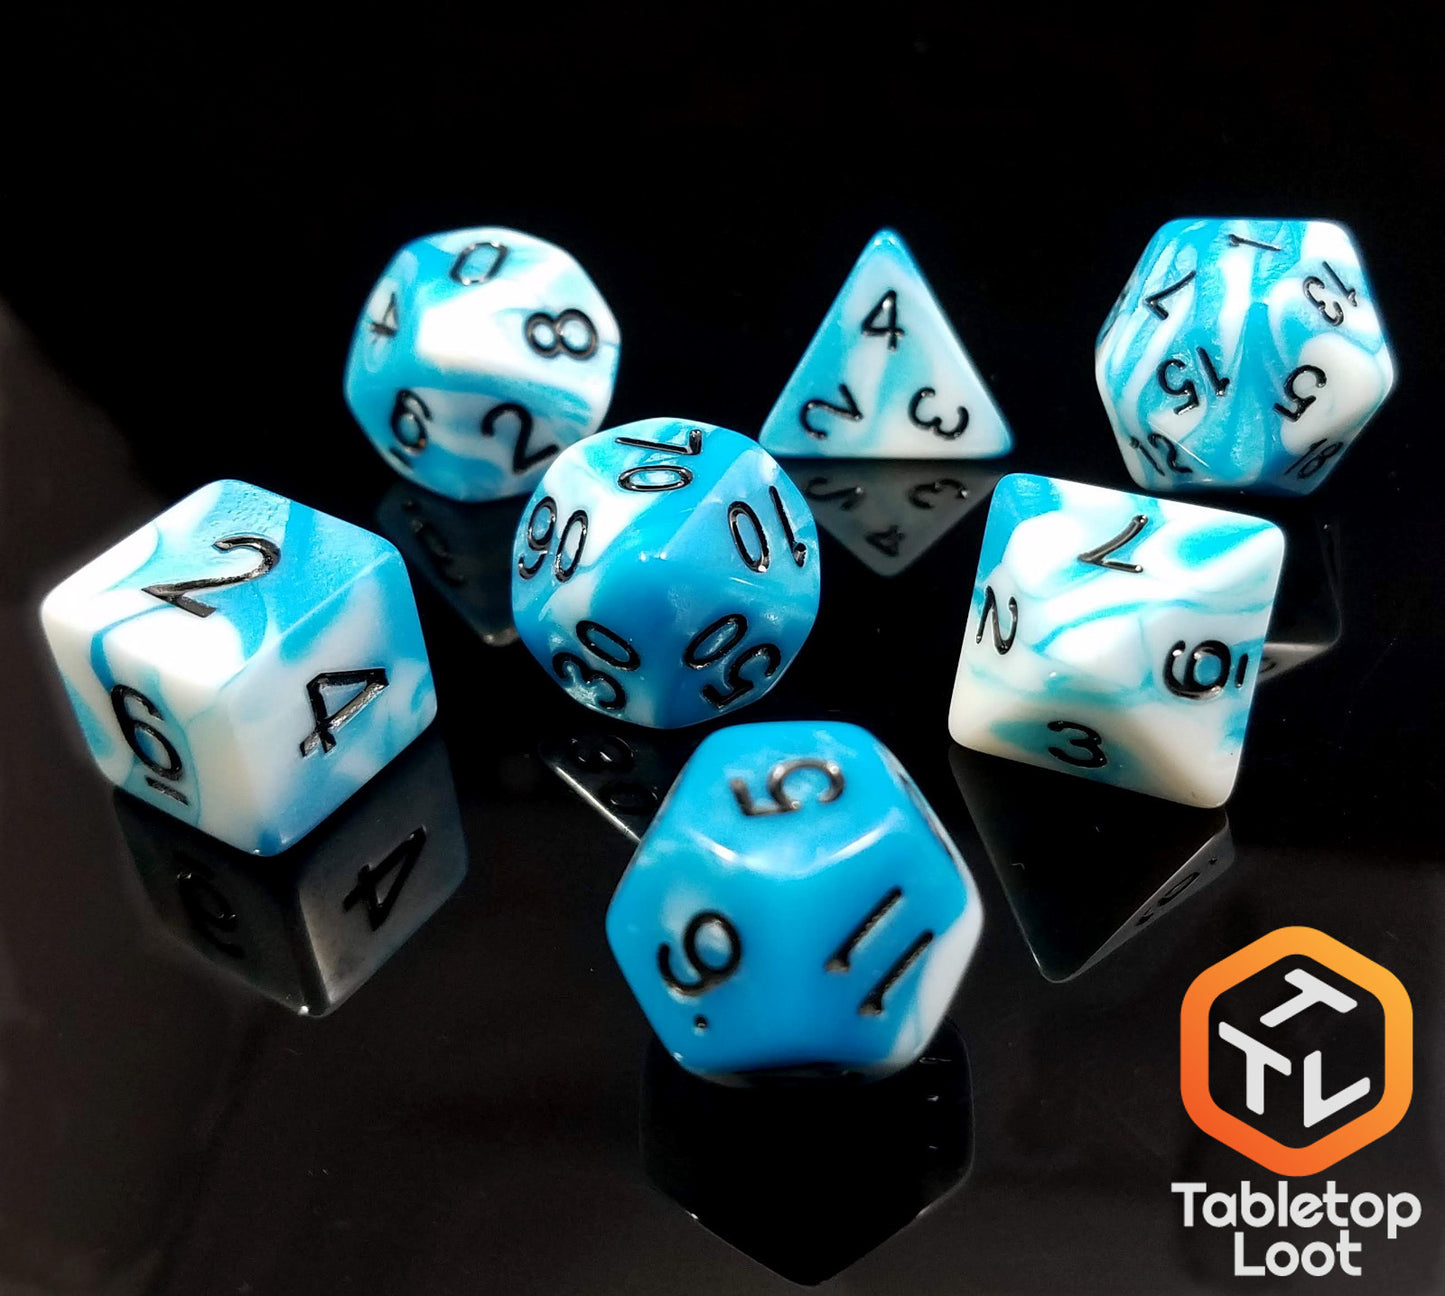 The Cloudy Sky 7 piece dice set from Tabletop Loot with swirls of bright blue and white resin and black numbering.